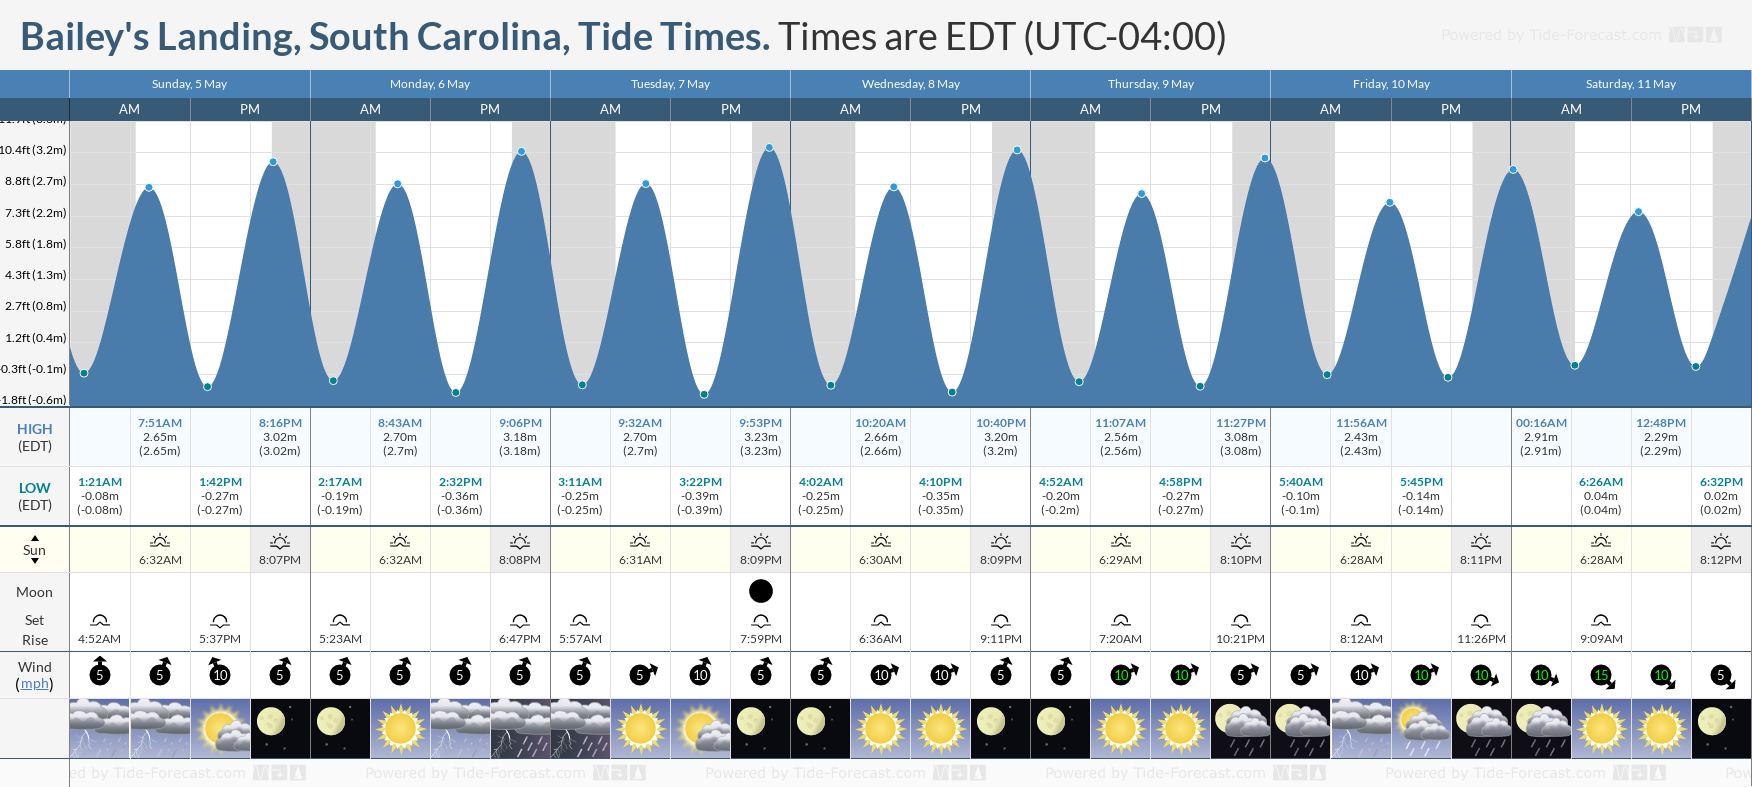 Bailey's Landing, South Carolina Tide Chart including high and low tide tide times for the next 7 days